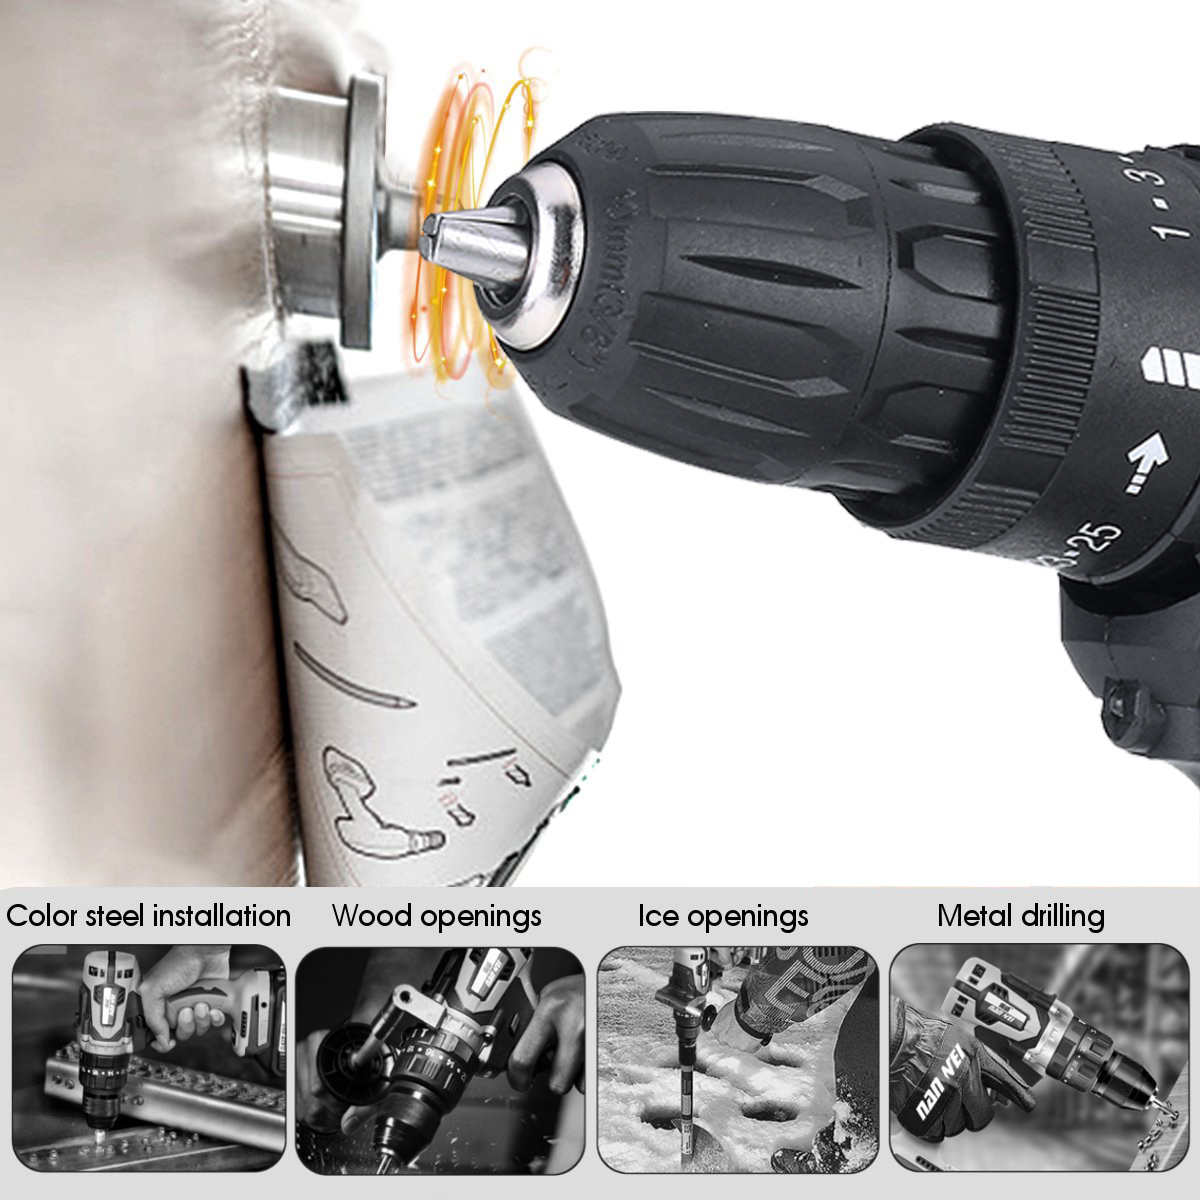 3-in-1-36V-550W-Cordless-Electric-Impact-Hammer-Drill-Screwdriver-2-Speeds-W-2pcs-Battery-1783991-5